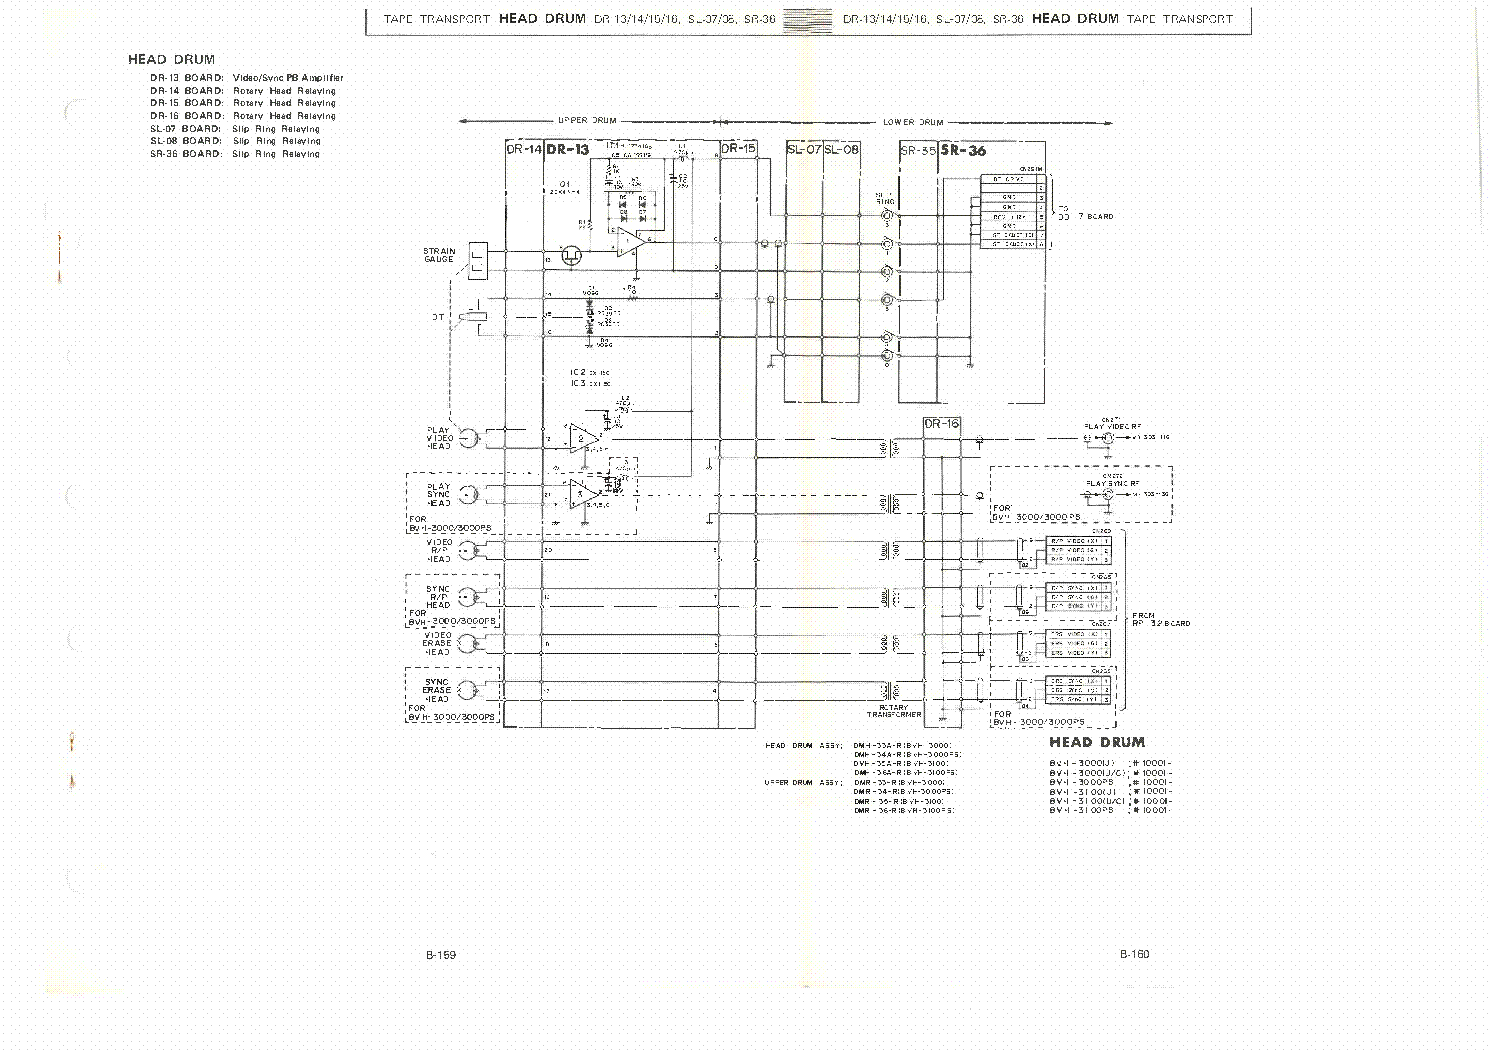 SONY BVH-3000PS BVH-3100PS SCHEMATIC DEAGRAMM AND BOARD LAYOUT TRANSPORT 1 service manual (1st page)